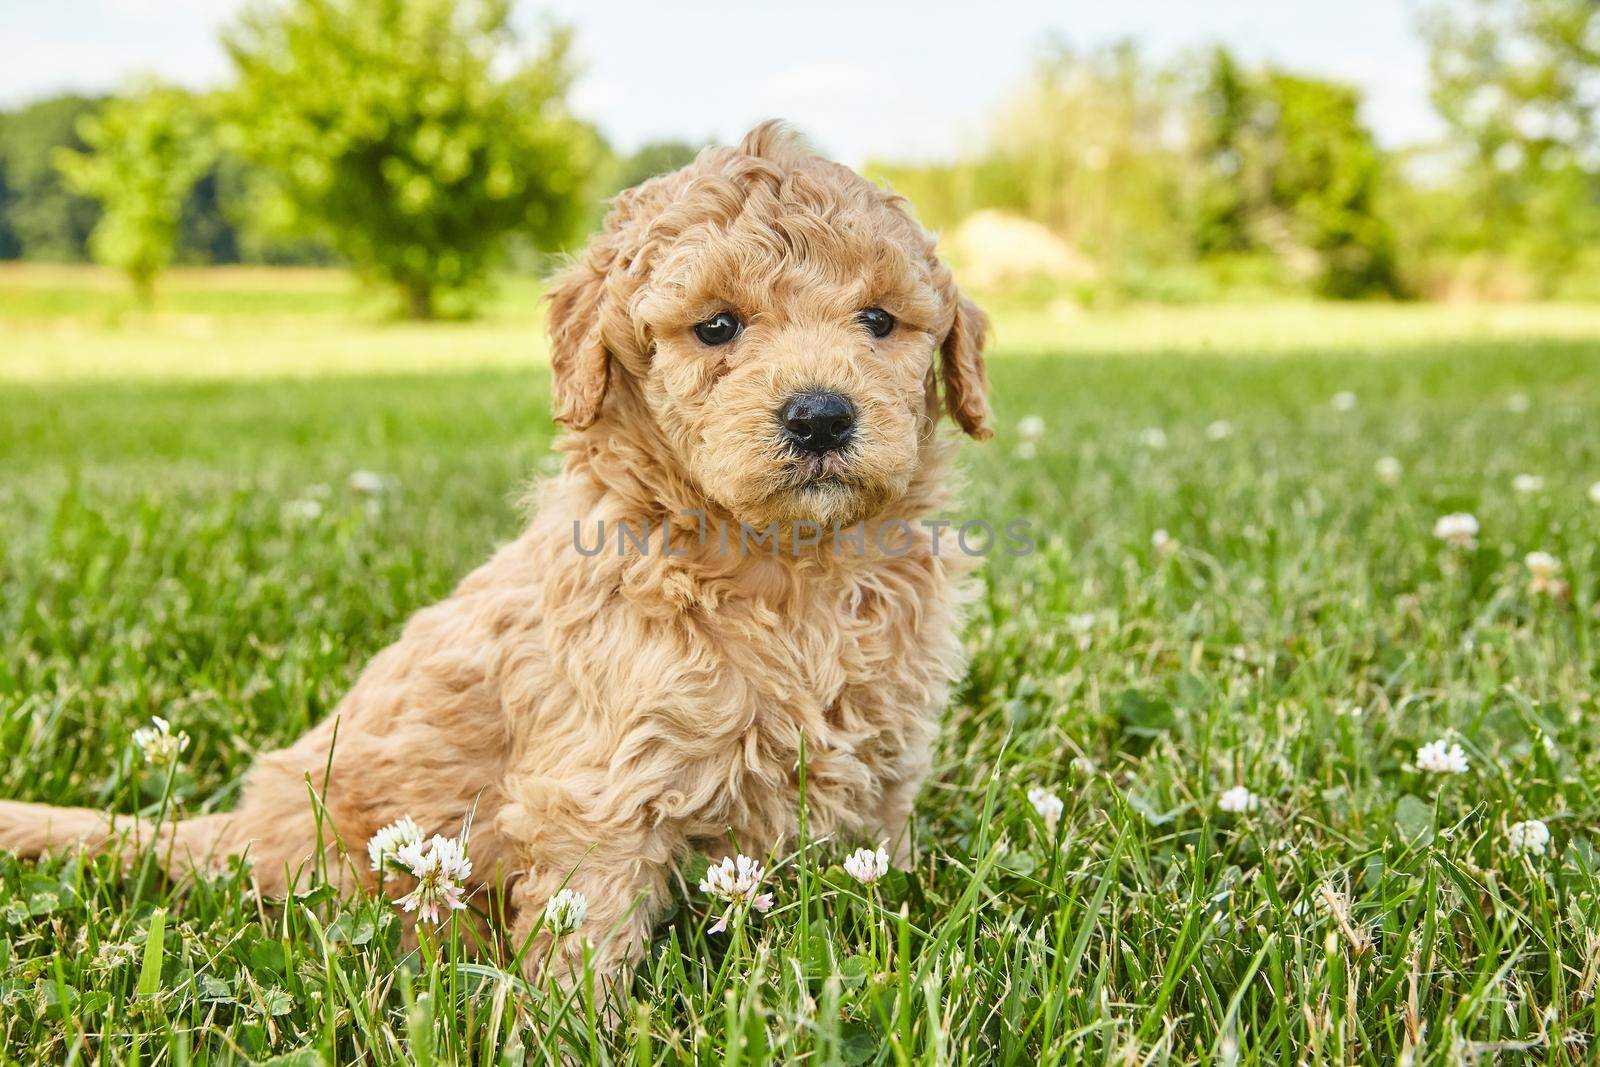 Image of Open lawn with Goldendoodle puppy sitting and looking cutely at you